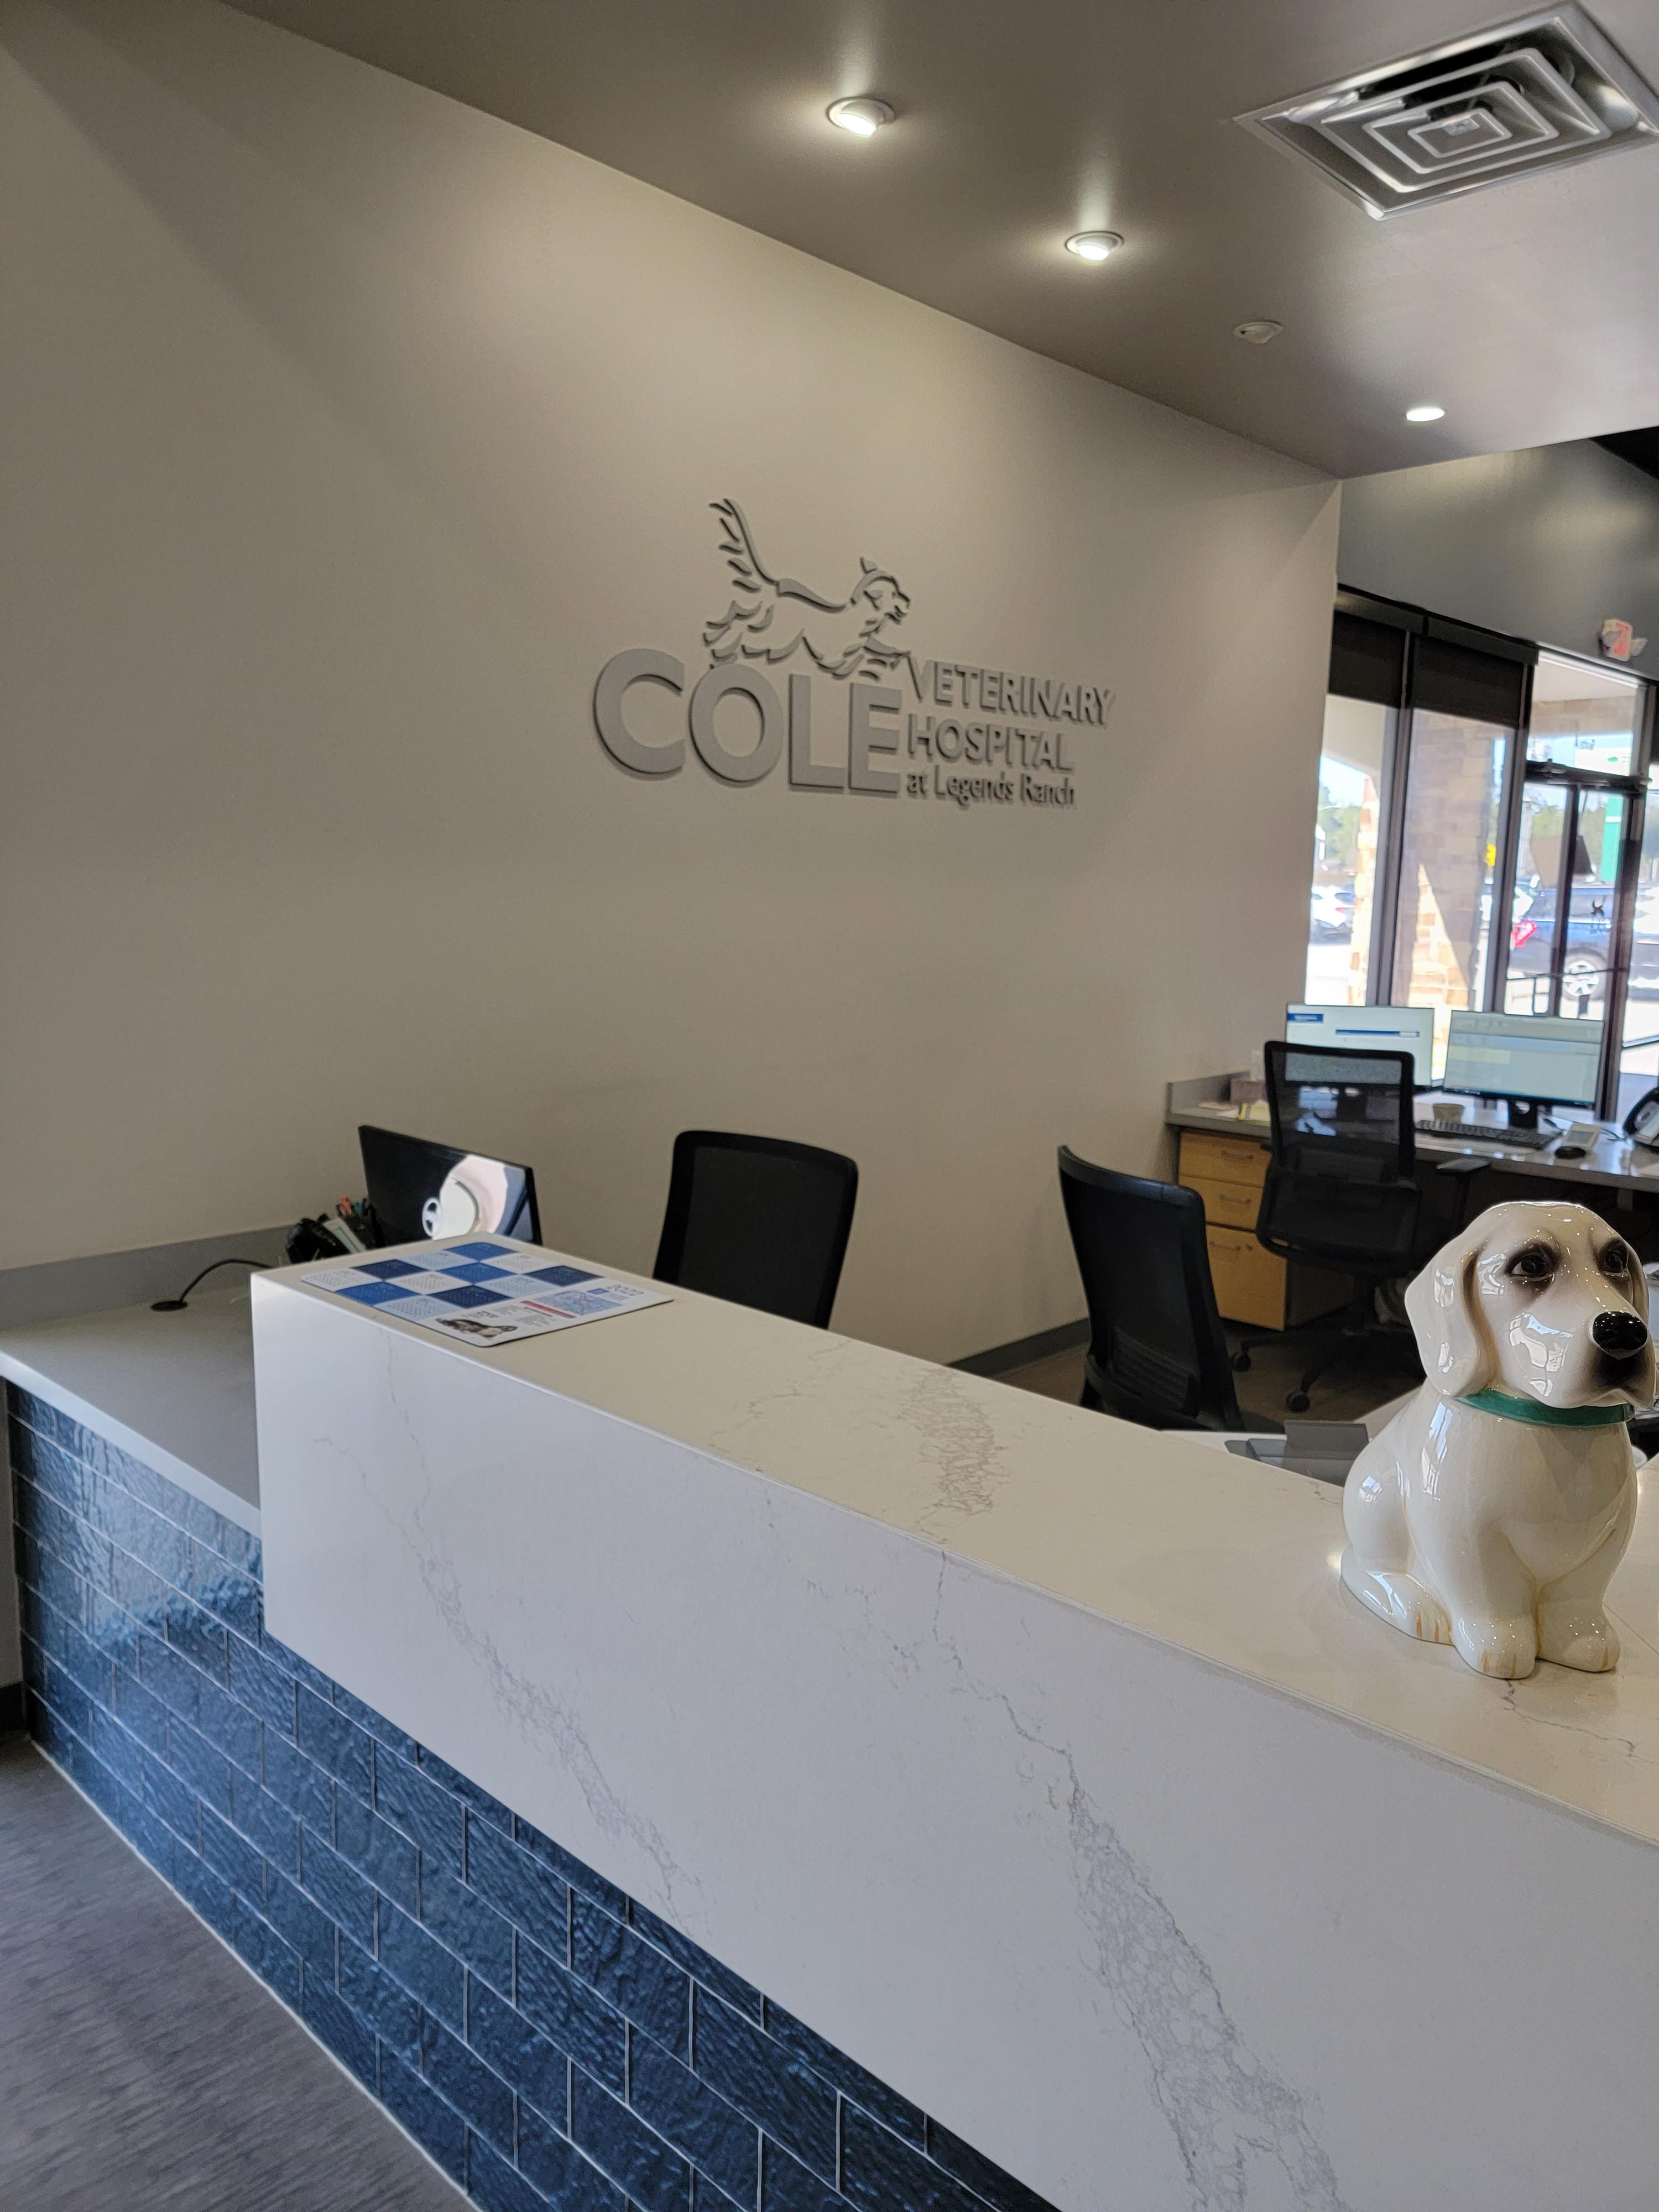 Image 4 | Cole Veterinary Hospital at Legends Ranch